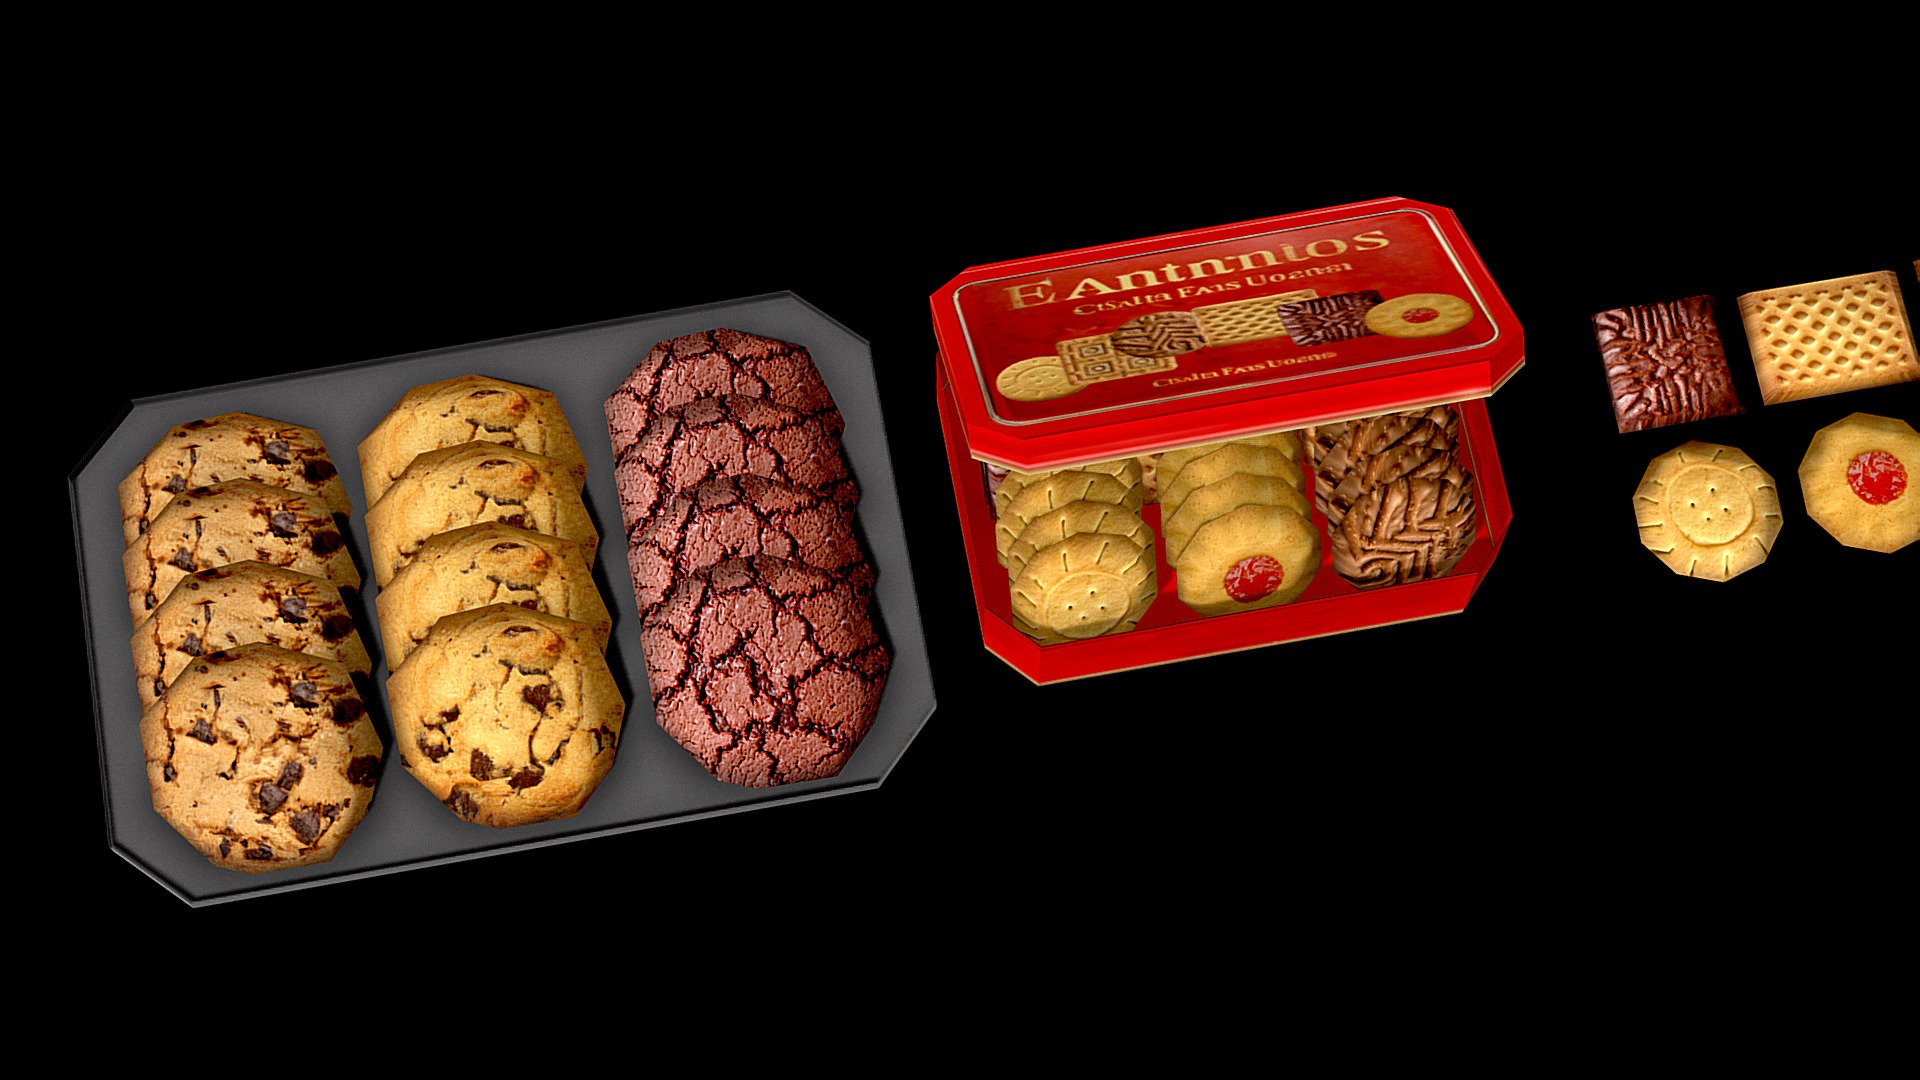 🍪🍪🍪Low poly set with different kinds of cookies and biscuits ♥(✿ฺ´∀`✿ฺ)ﾉ

Includes tin(no color map) with cookies, red metal box with biscuits, separete low poly cookies and biscuits.

Base color maps are 256x256 px.

𝙮𝙤𝙪 𝙘𝙖𝙣 𝙨𝙪𝙥𝙥𝙤𝙧𝙩 𝙢𝙚 𝙤𝙣 𝙠𝙤-𝙛𝙞 (╯⋋□⋌)╯=͟͟͞͞ ♥♥♥♥ ko-fi.com/sffffffff - 🍪 cookies set 🍪 - Download Free 3D model by gulvtaepper 3d model